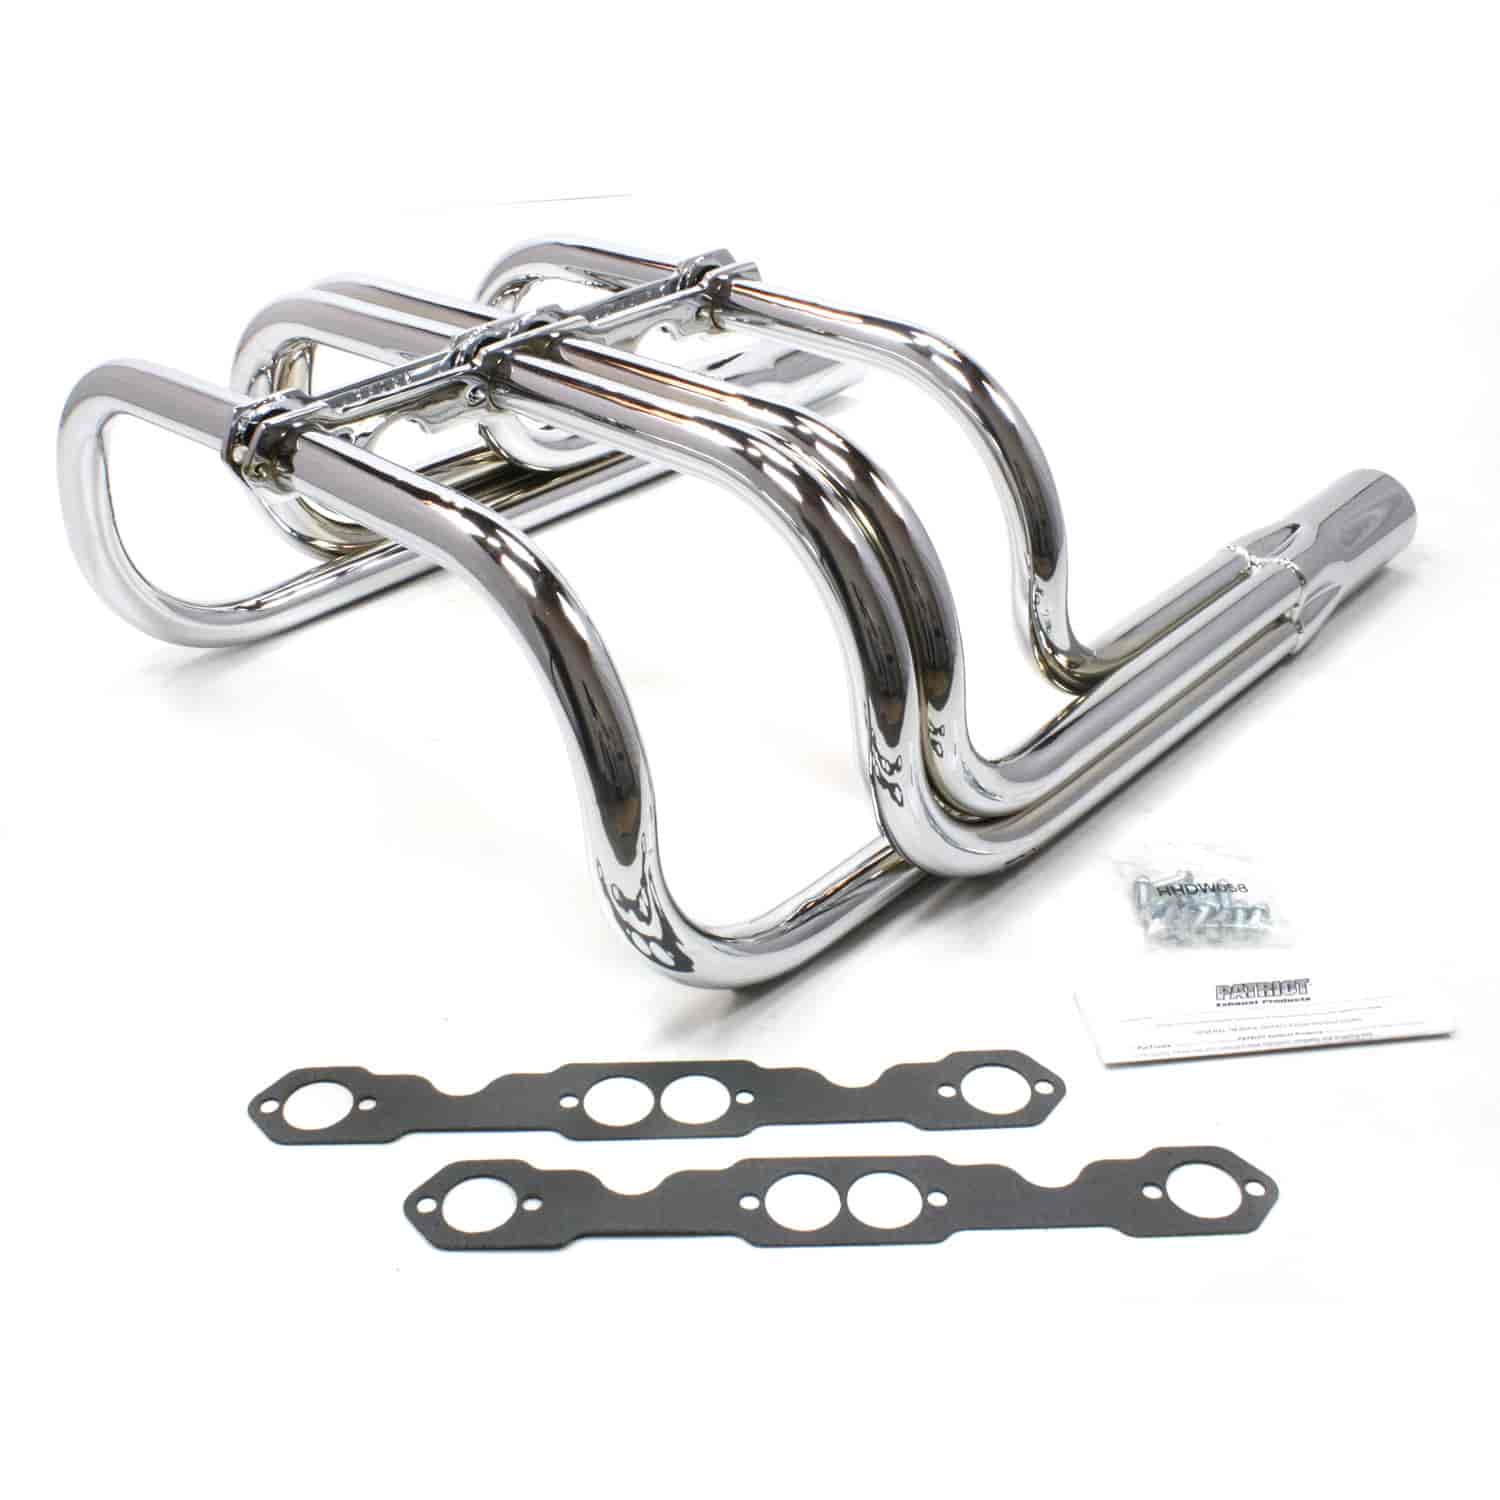 Classic Style Headers for T-Bucket 265-400 Chevy Small Block